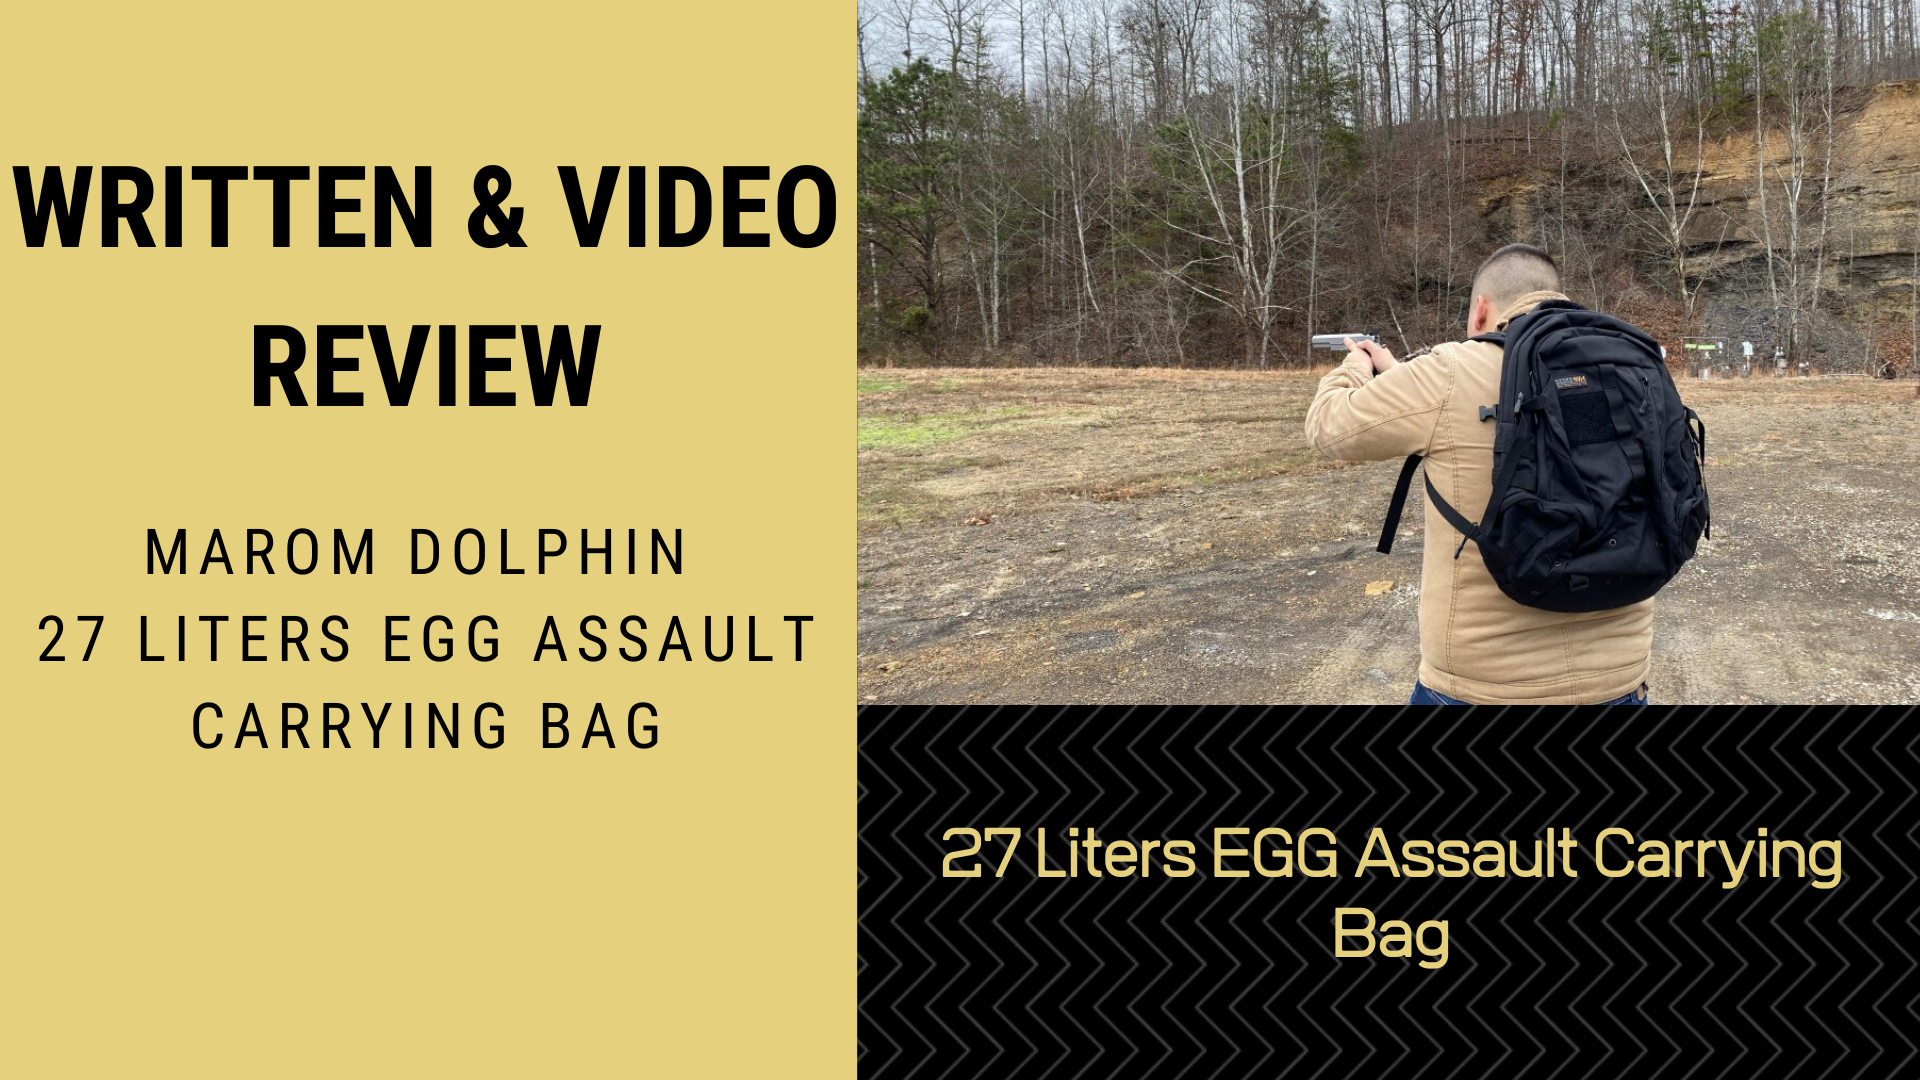 Written & Video Review Marom Dolphin 27 Liters EGG Assault Carrying Bag